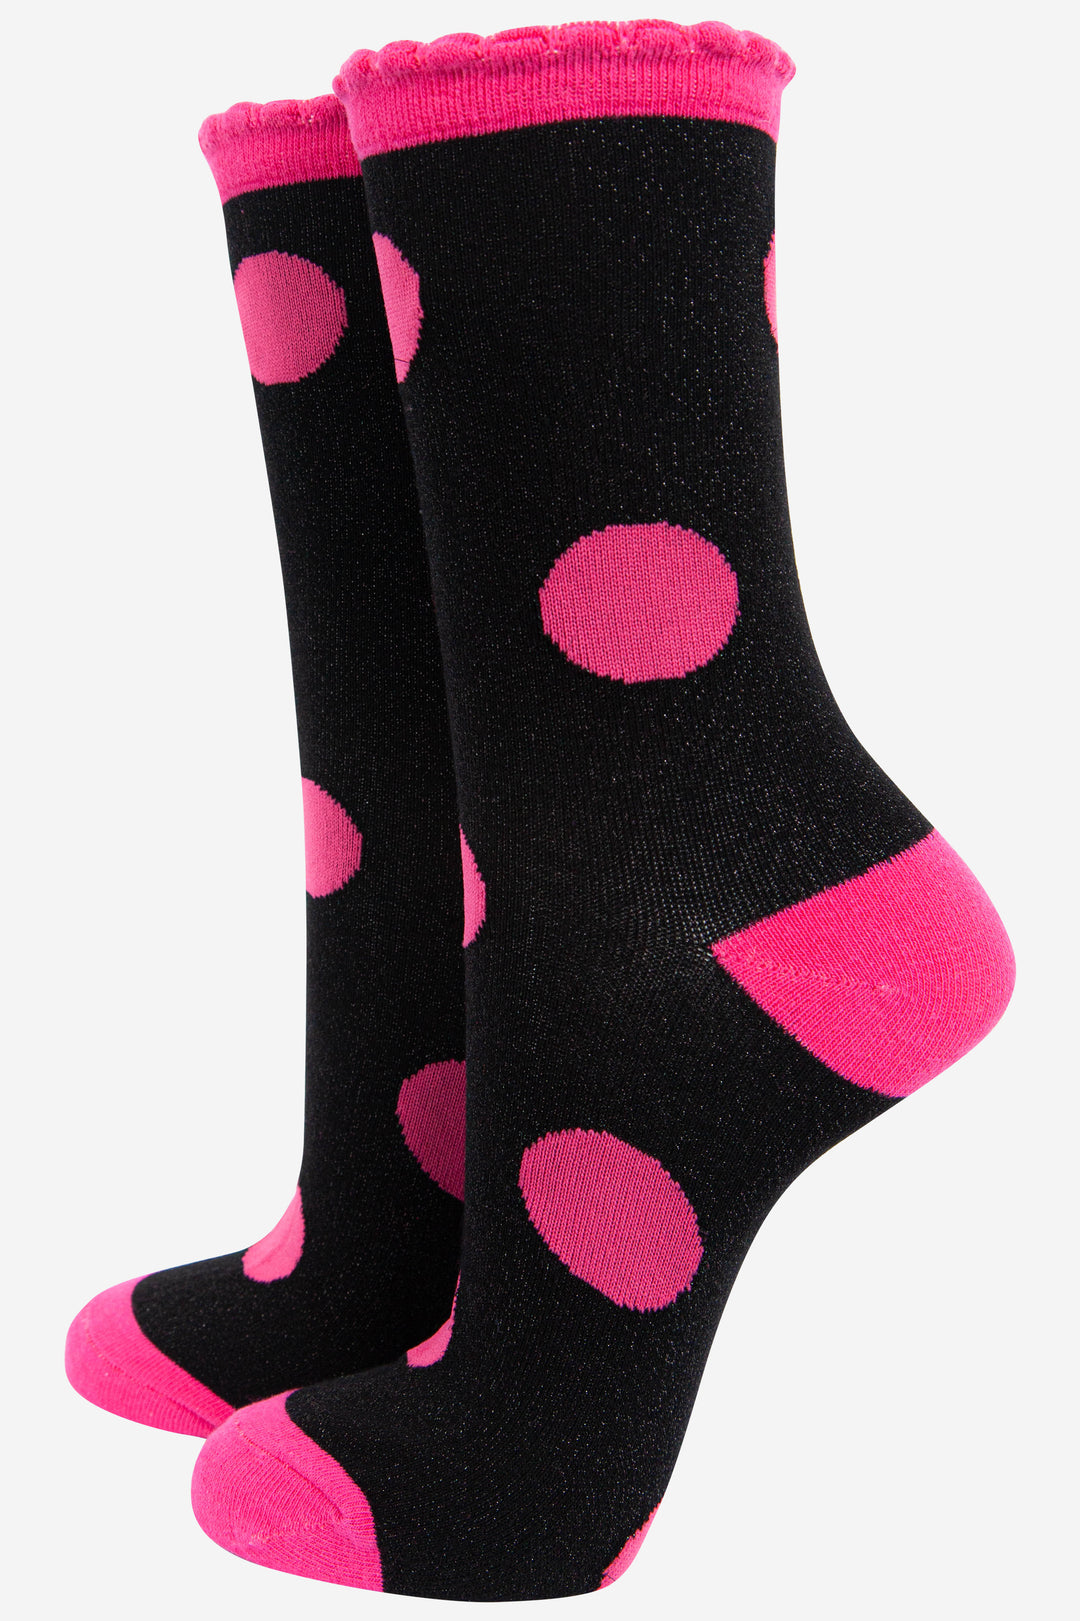 black and pink glitter ankle socks with an all over large polka dot spot pattern and sparkly shimmer, the socks have scalloped edge cuffs